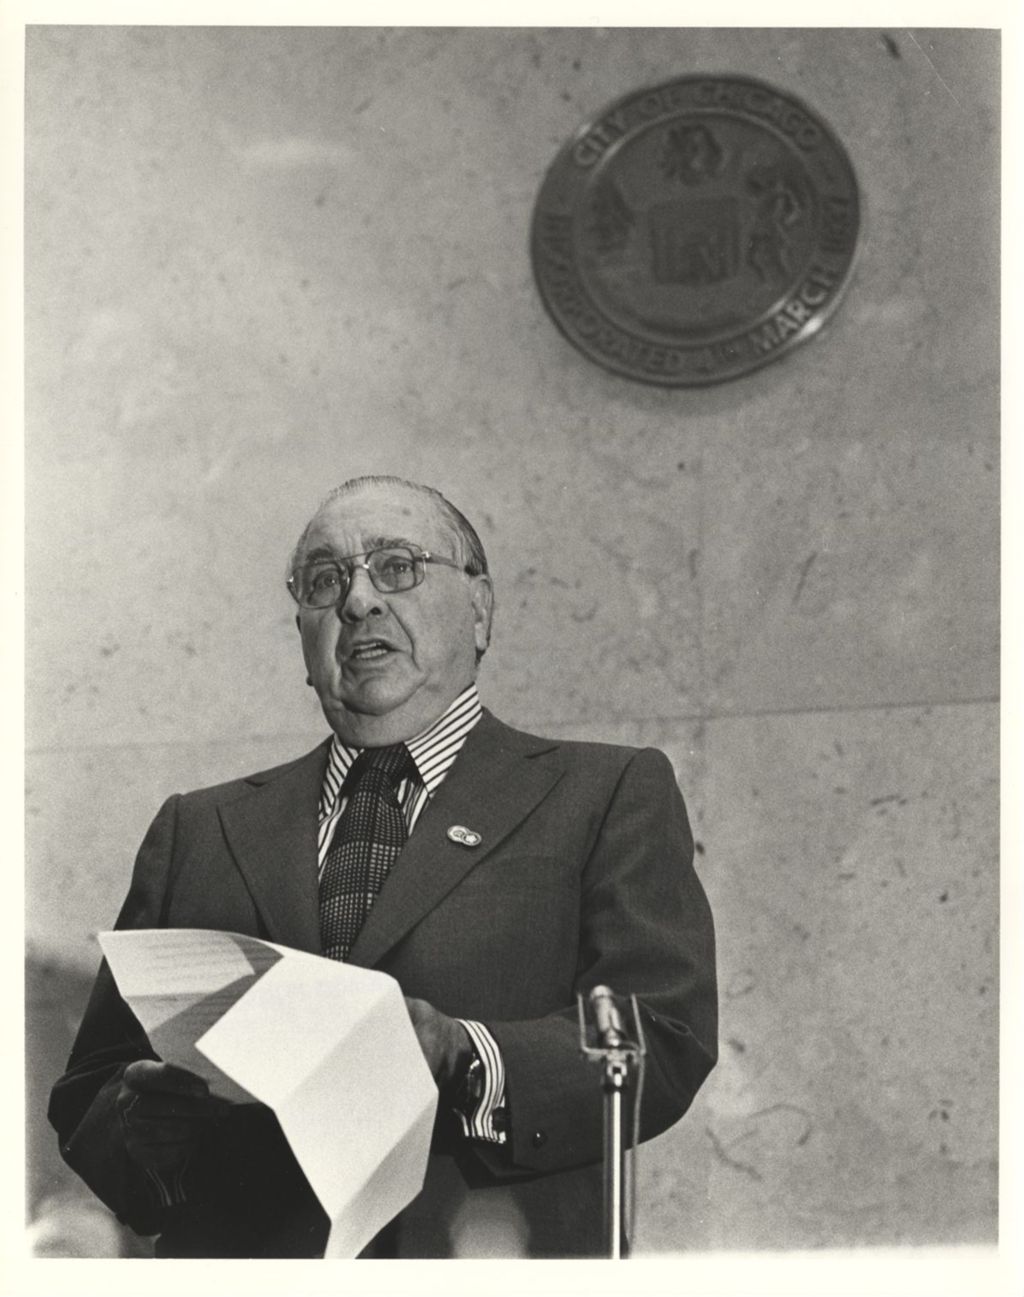 Richard J. Daley speaking before City Council